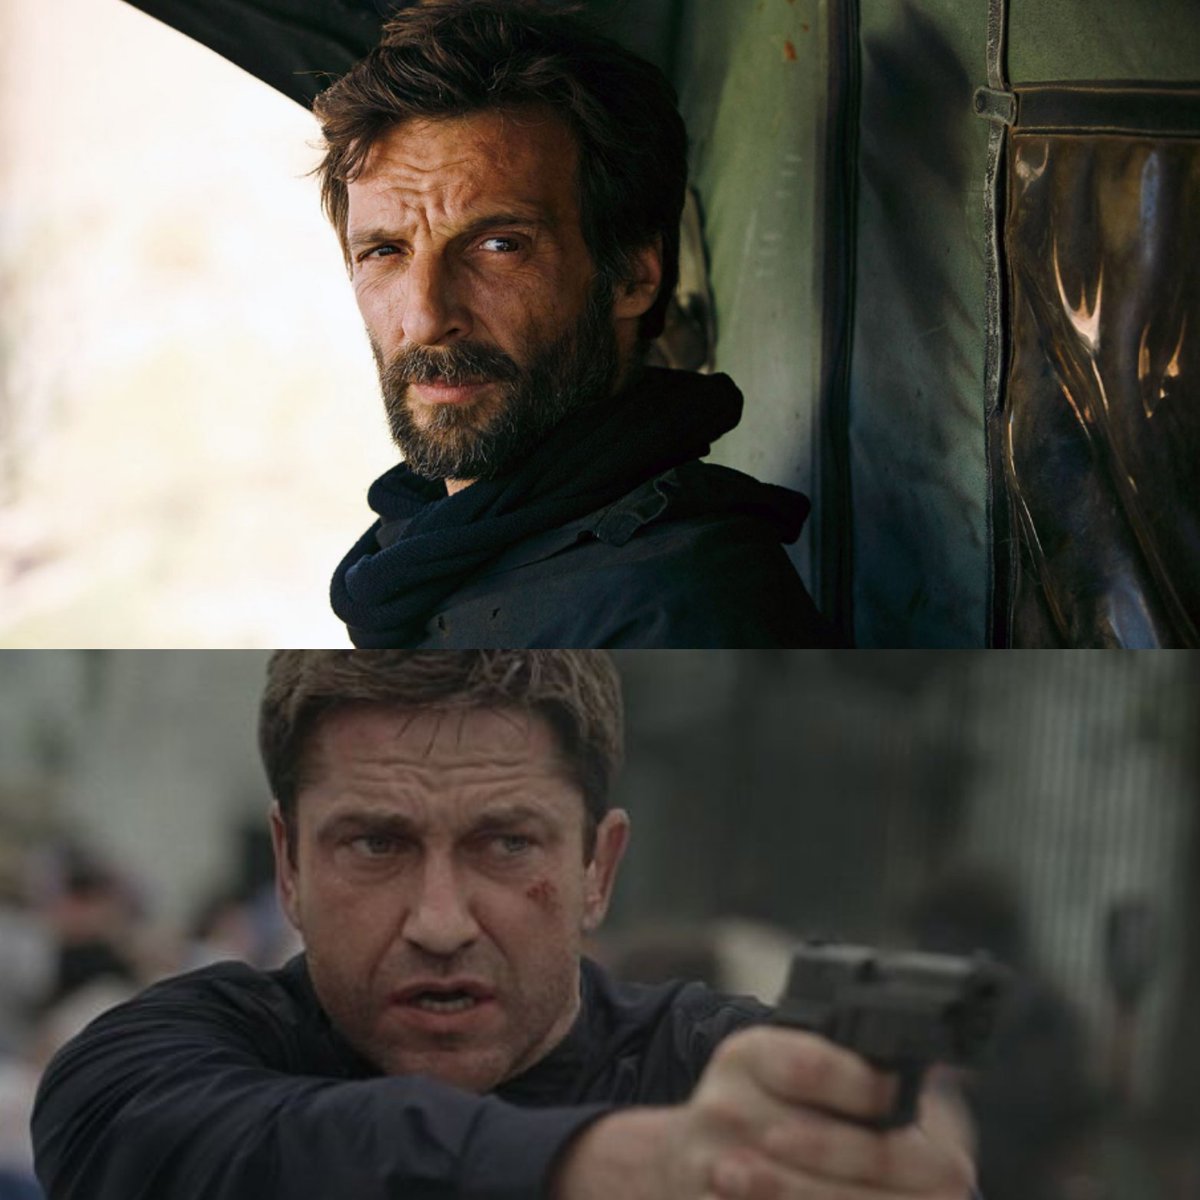 The 'Has Fallen' franchise is getting the television treatment with #ParisHasFallen. French actor #MathieuKassovitz is set to star in the series with #GerardButler serving as producer via #GBase. Butler could also make a cameo as #MikeBanning.